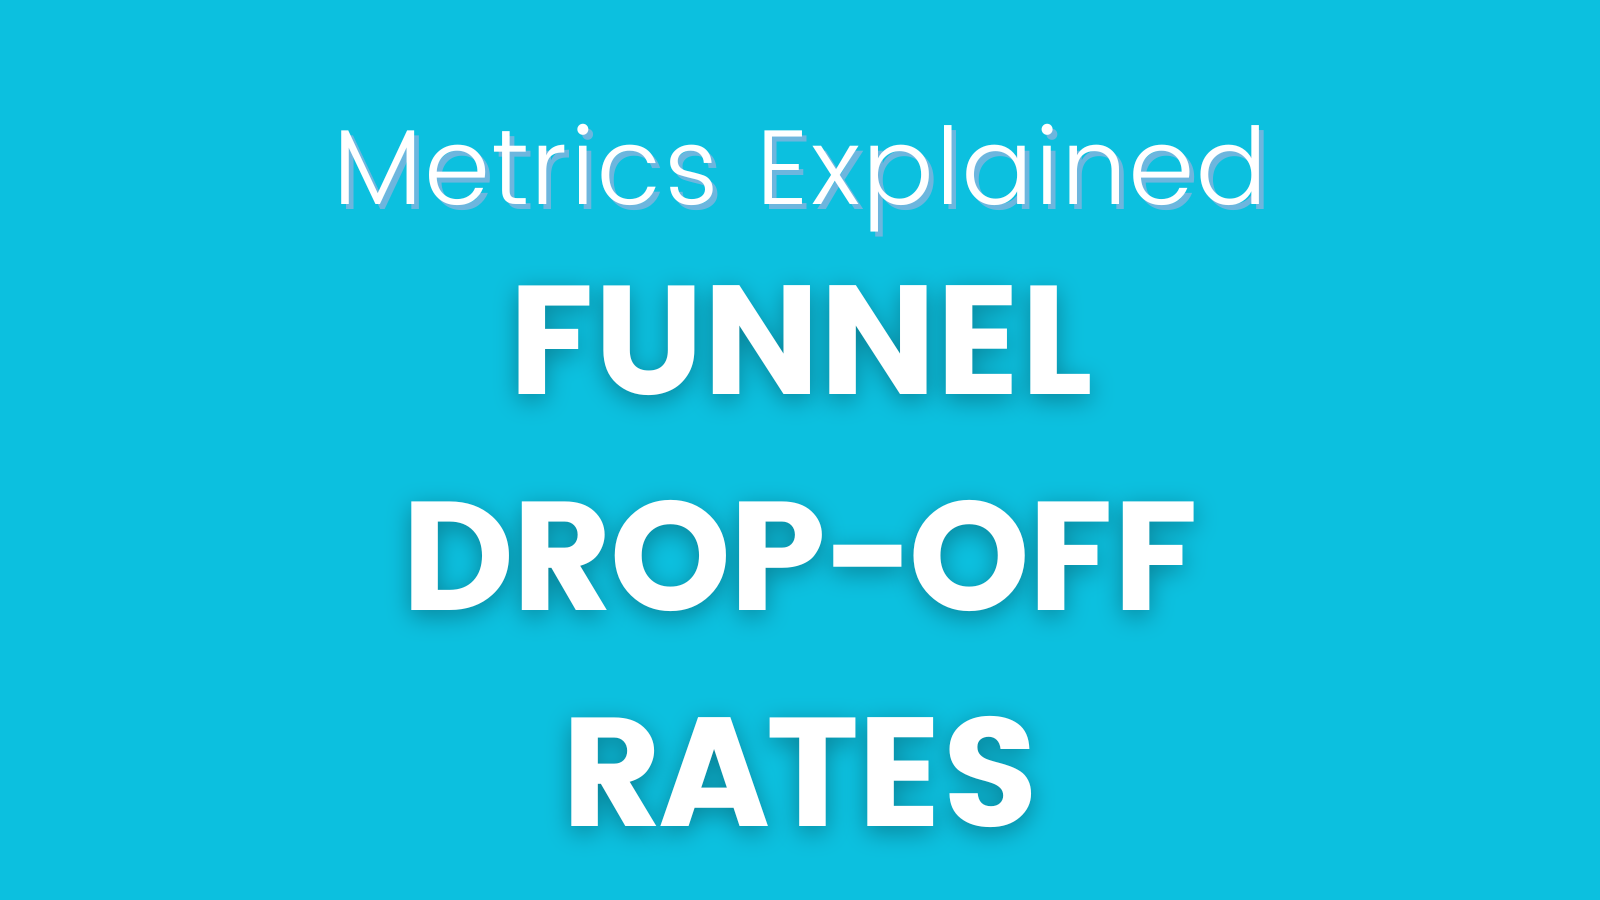 Funnel Drop-off Rates